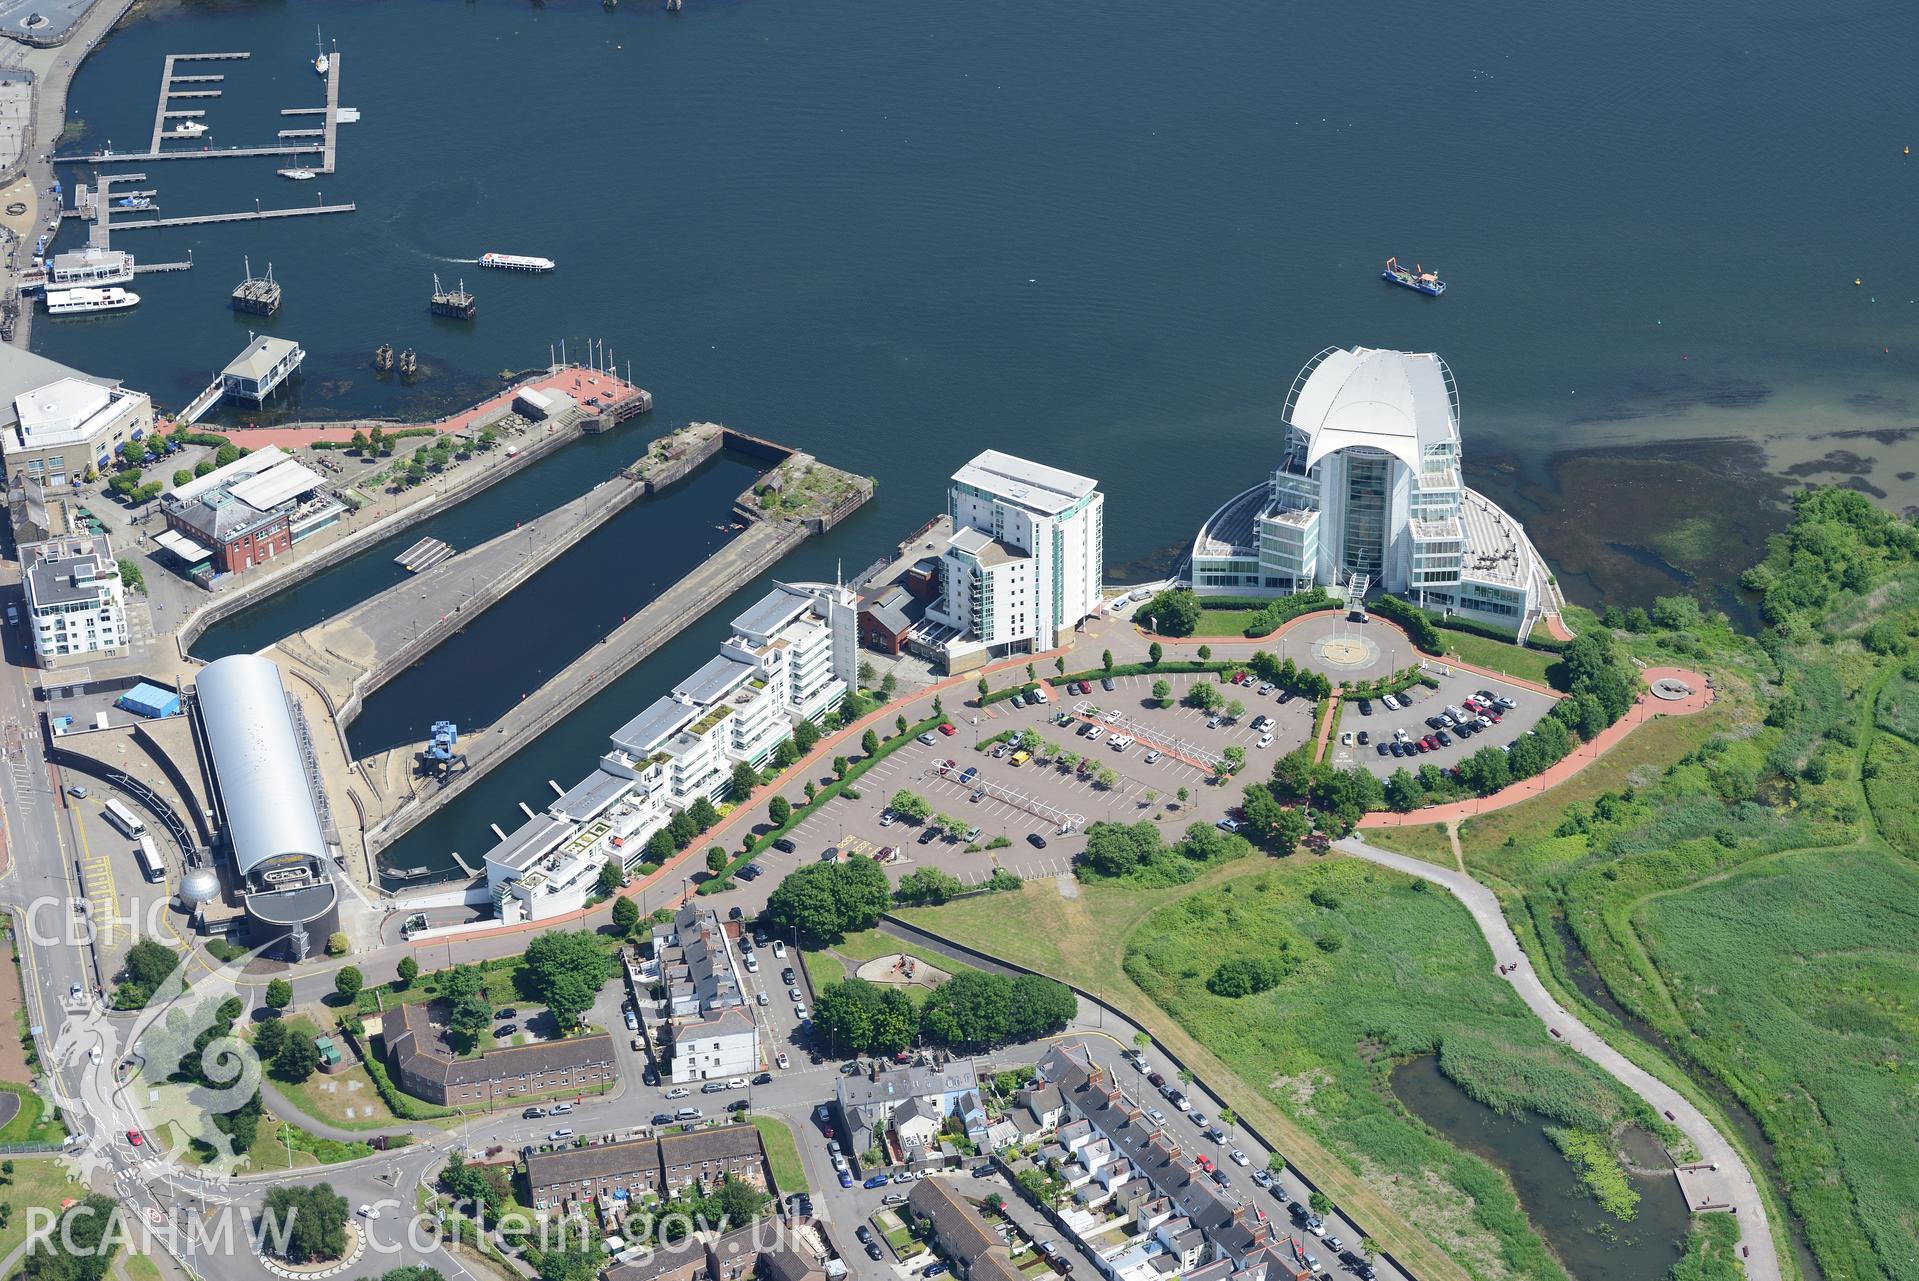 Techniquest and the St. David's Hotel, Cardiff Bay. Oblique aerial photograph taken during the Royal Commission's programme of archaeological aerial reconnaissance by Toby Driver on 29th June 2015.